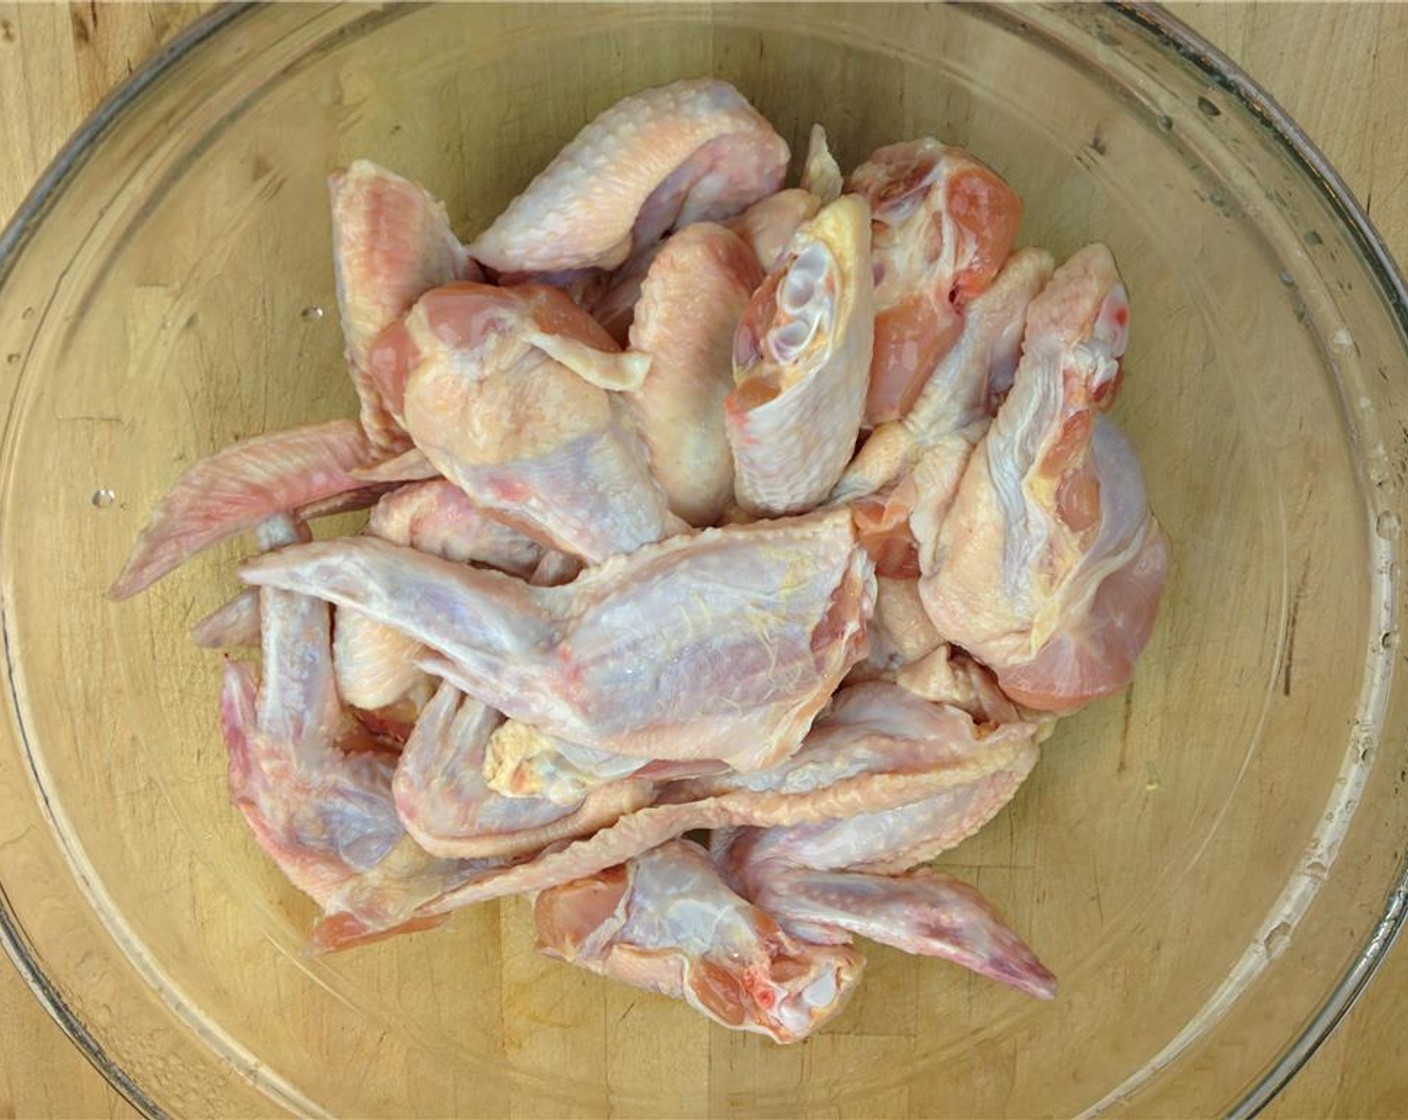 step 5 While the marinade is in the refrigerator, unpack, clean and thoroughly rinse Chicken Wings (3 lb) removing any stray feathers. After chicken has been rinsed, pat the pieces dry using a paper towel.